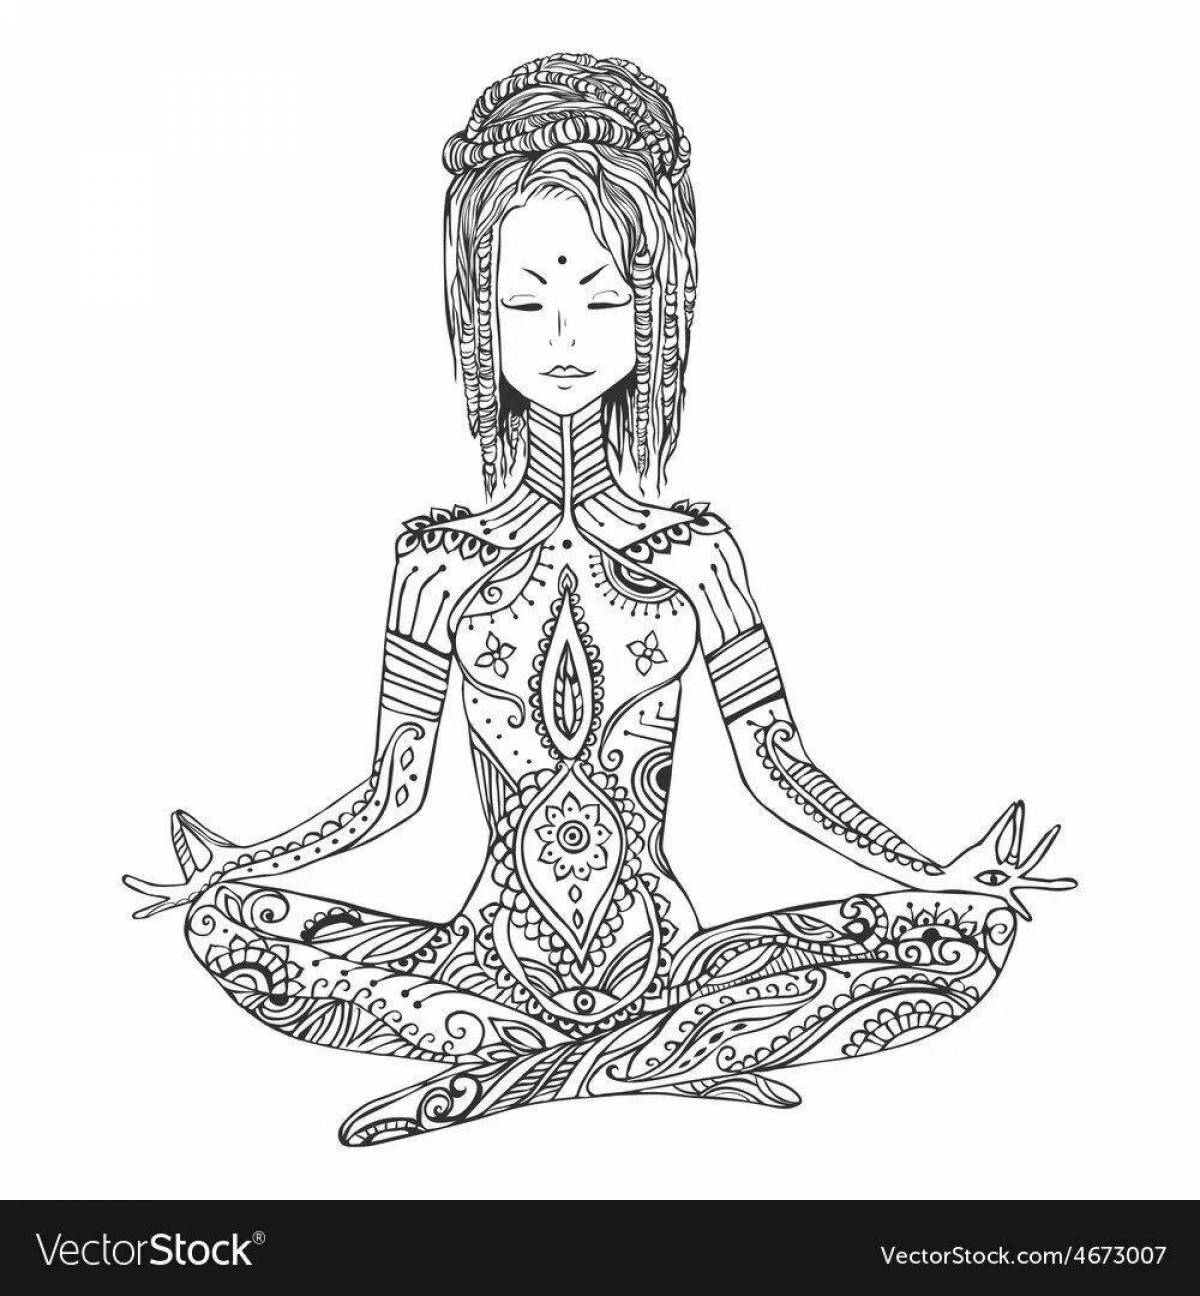 Serene coloring page for meditation and relaxation